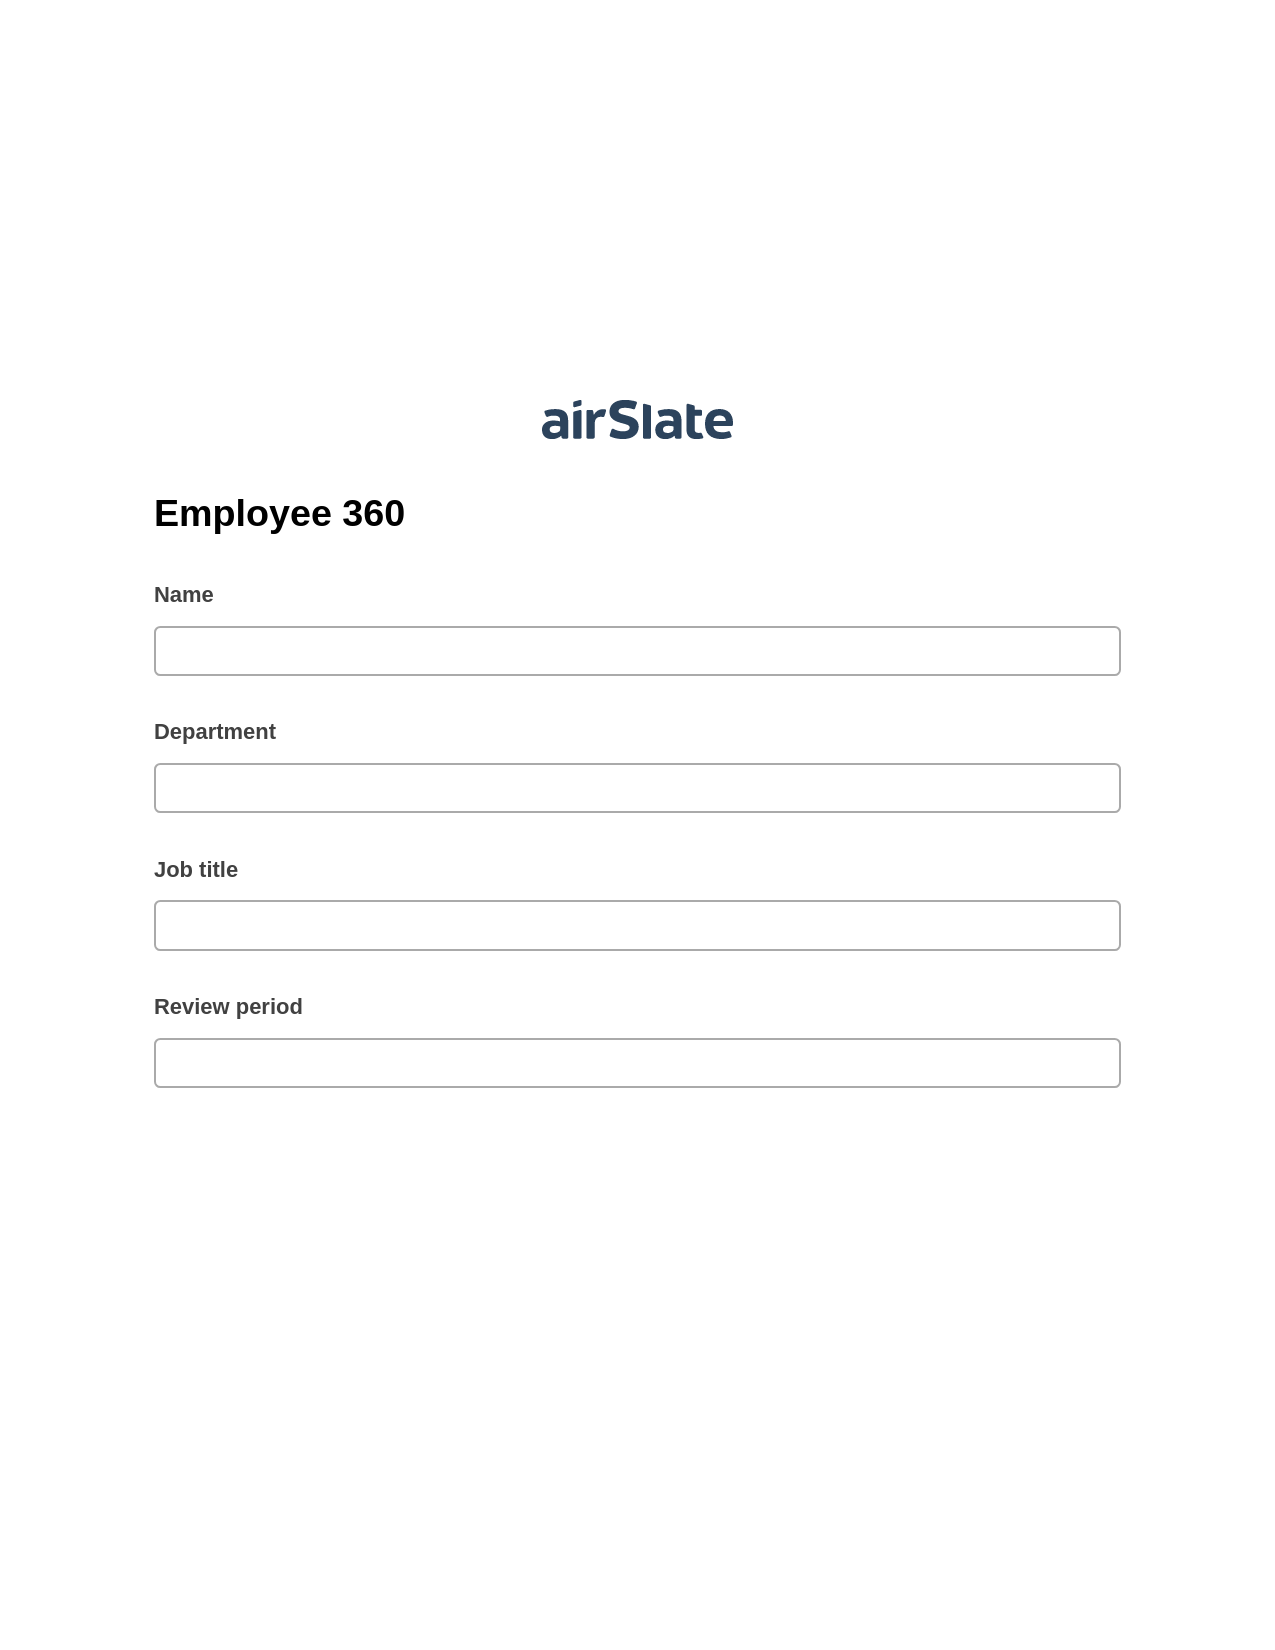 Employee 360 Pre-fill Dropdowns from CSV file Bot, Create MS Dynamics 365 Records Bot, Export to WebMerge Bot